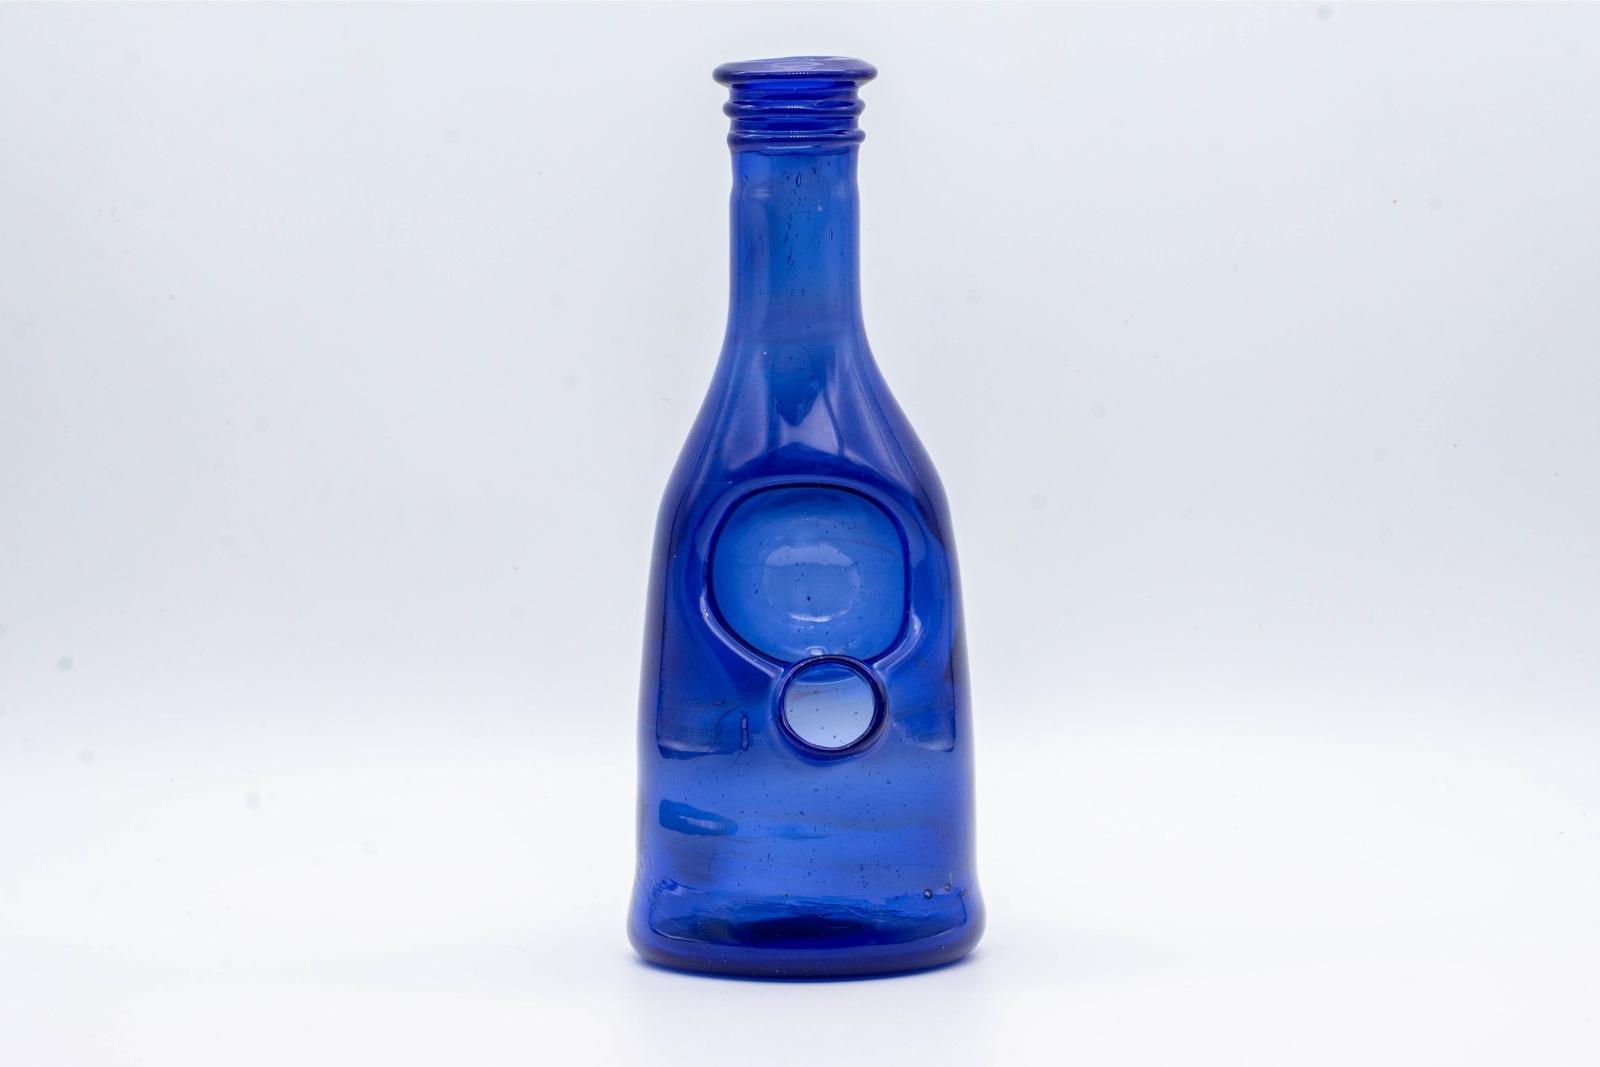 A blue sake bottle rig by Costa Glass, on a white background